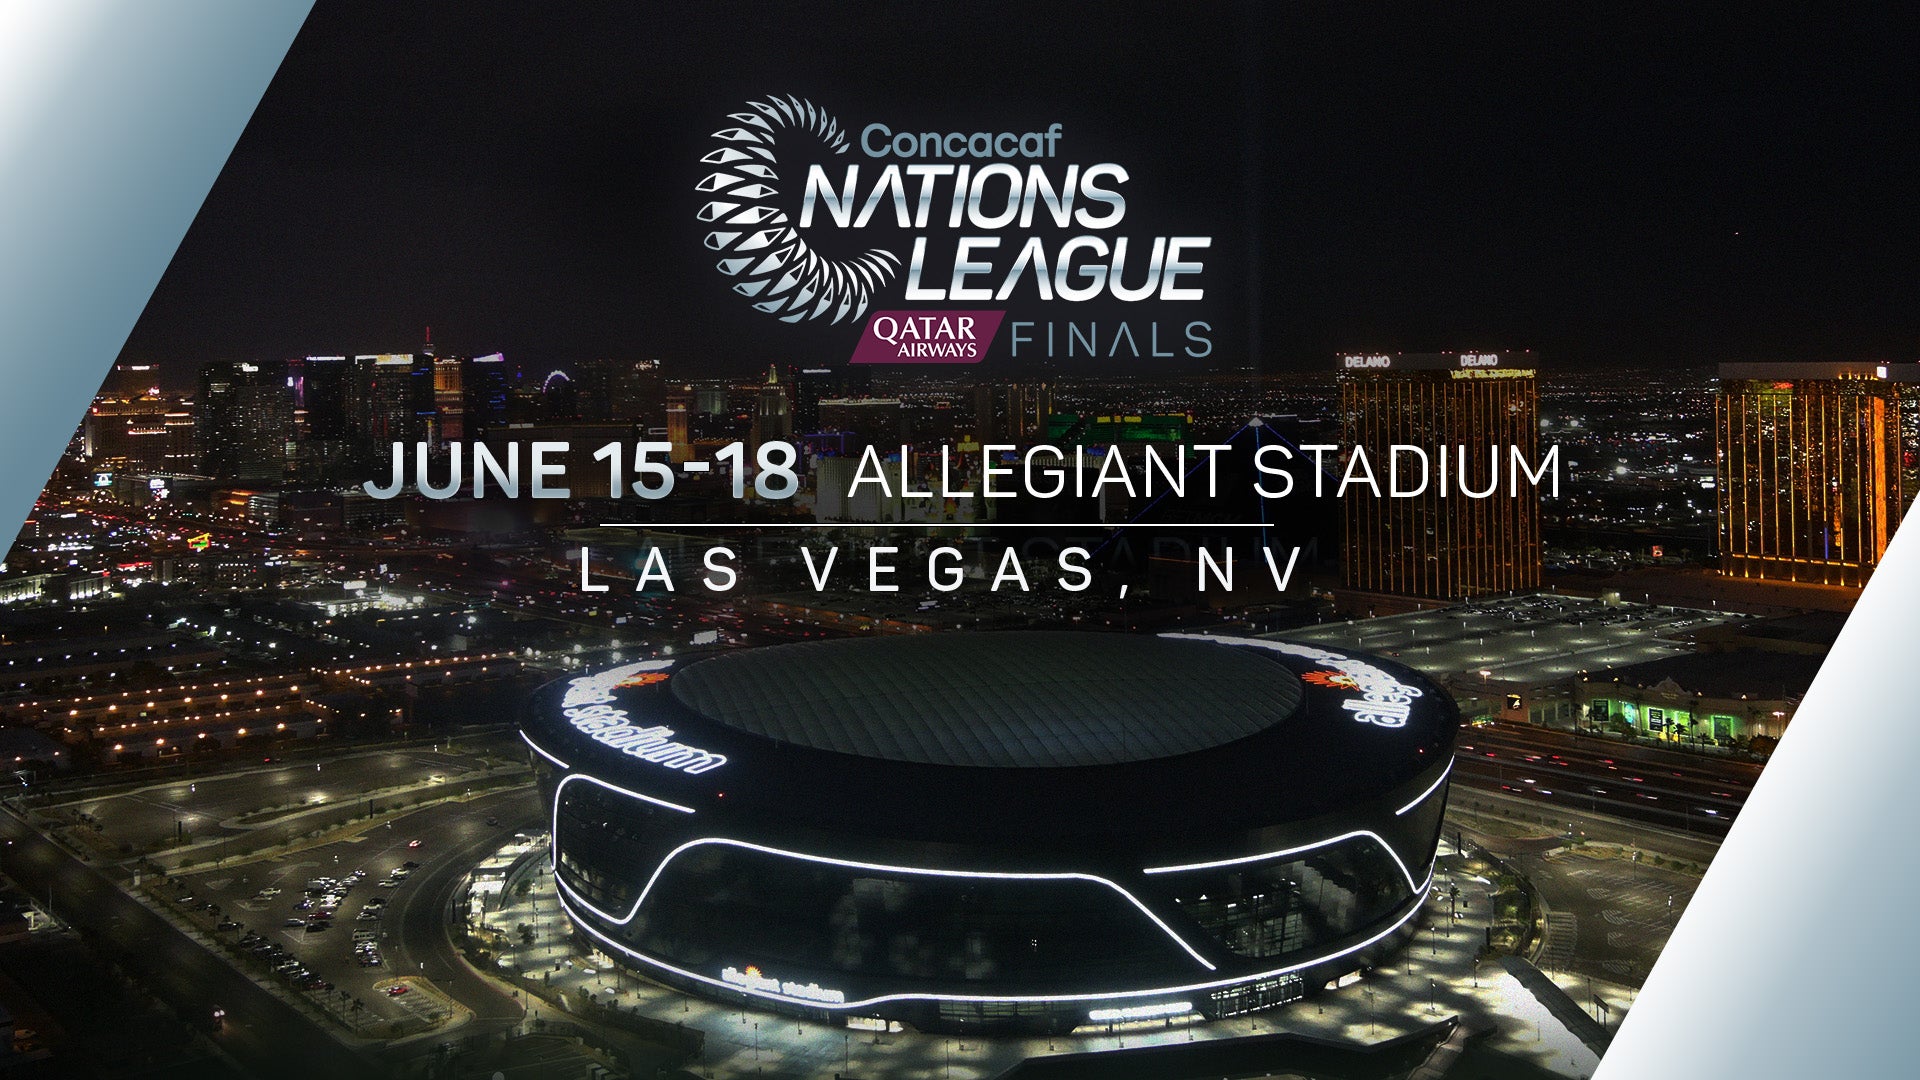 Las Vegas to host 2022/23 Concacaf Nations League Finals in June